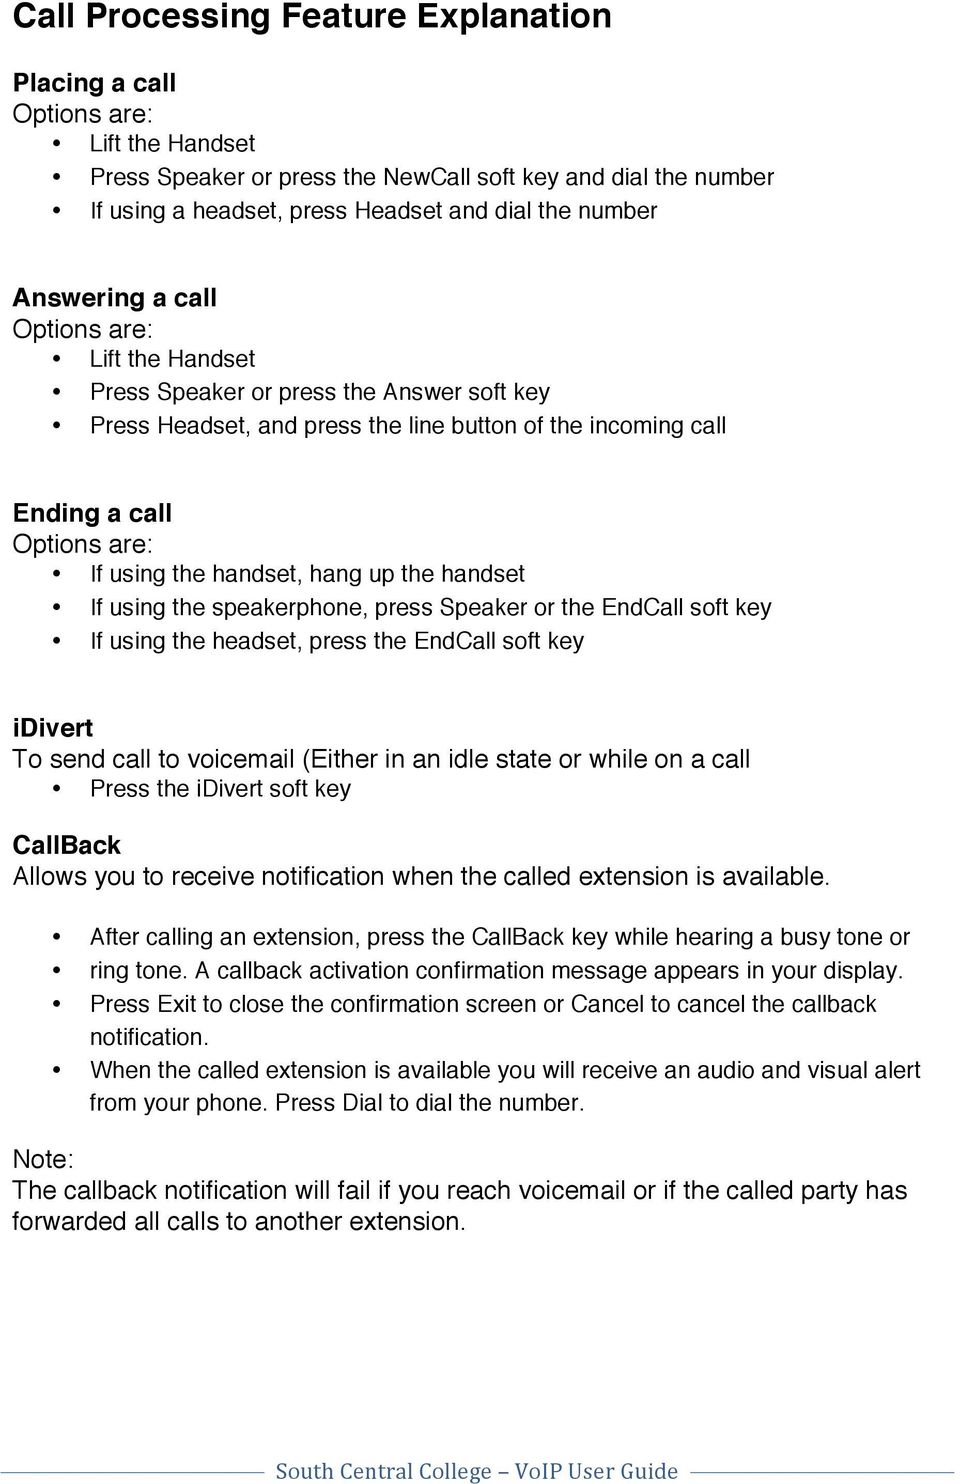 speakerphone, press Speaker or the EndCall soft key If using the headset, press the EndCall soft key idivert To send call to voicemail (Either in an idle state or while on a call Press the idivert